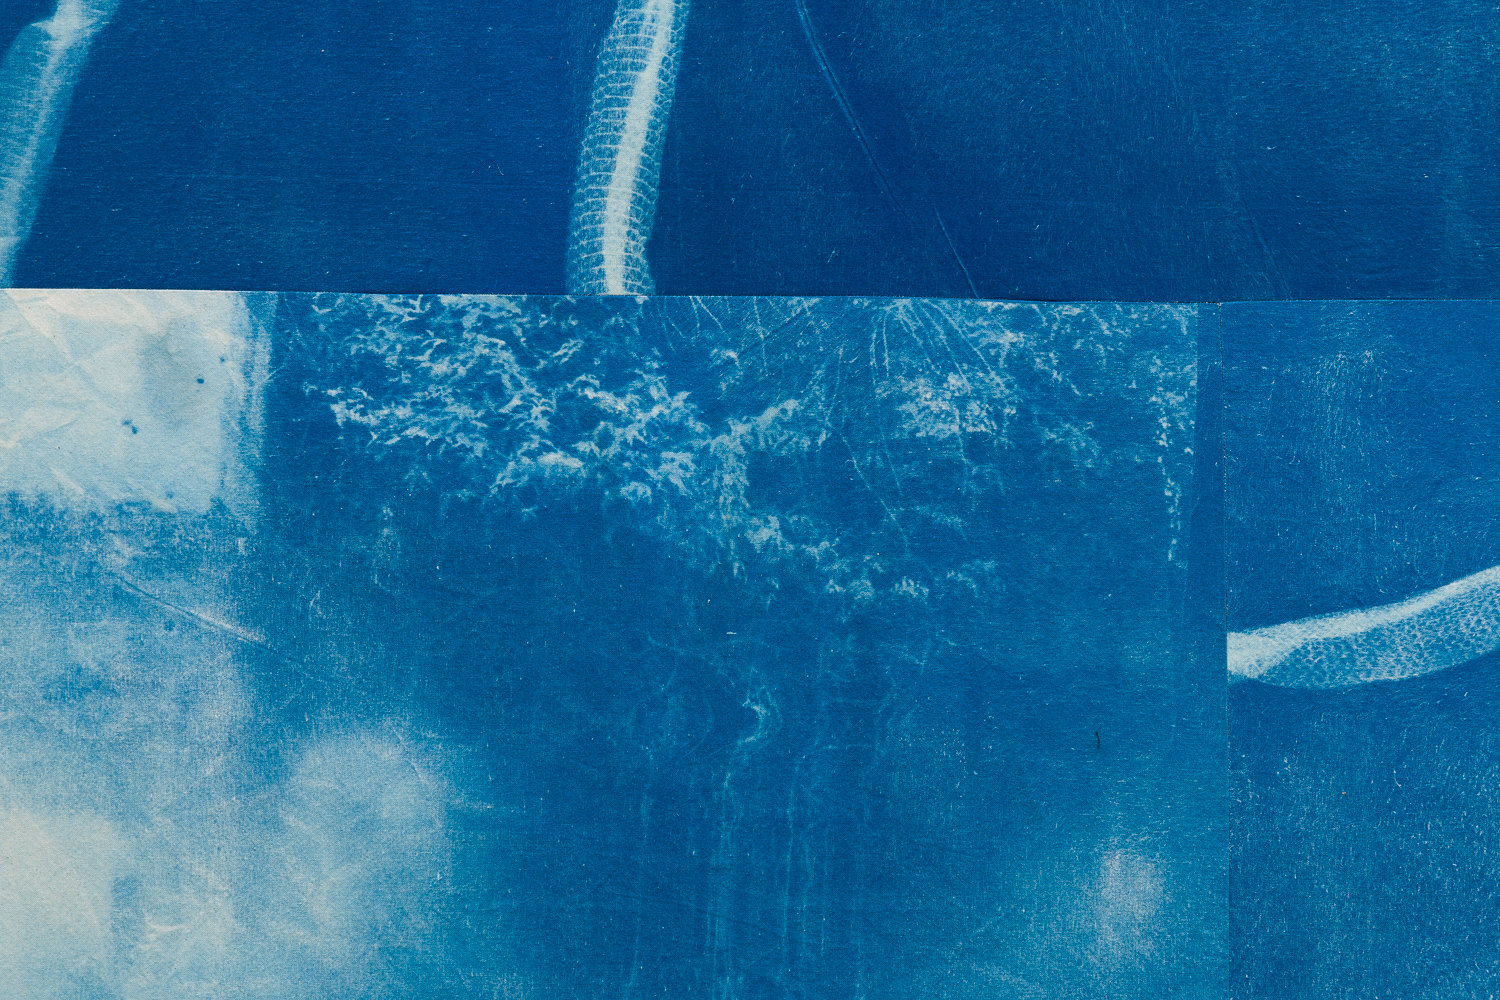 Felix Melia, Detail  'High Tide', from 'Stages', 2022, cyanotype print on cotton